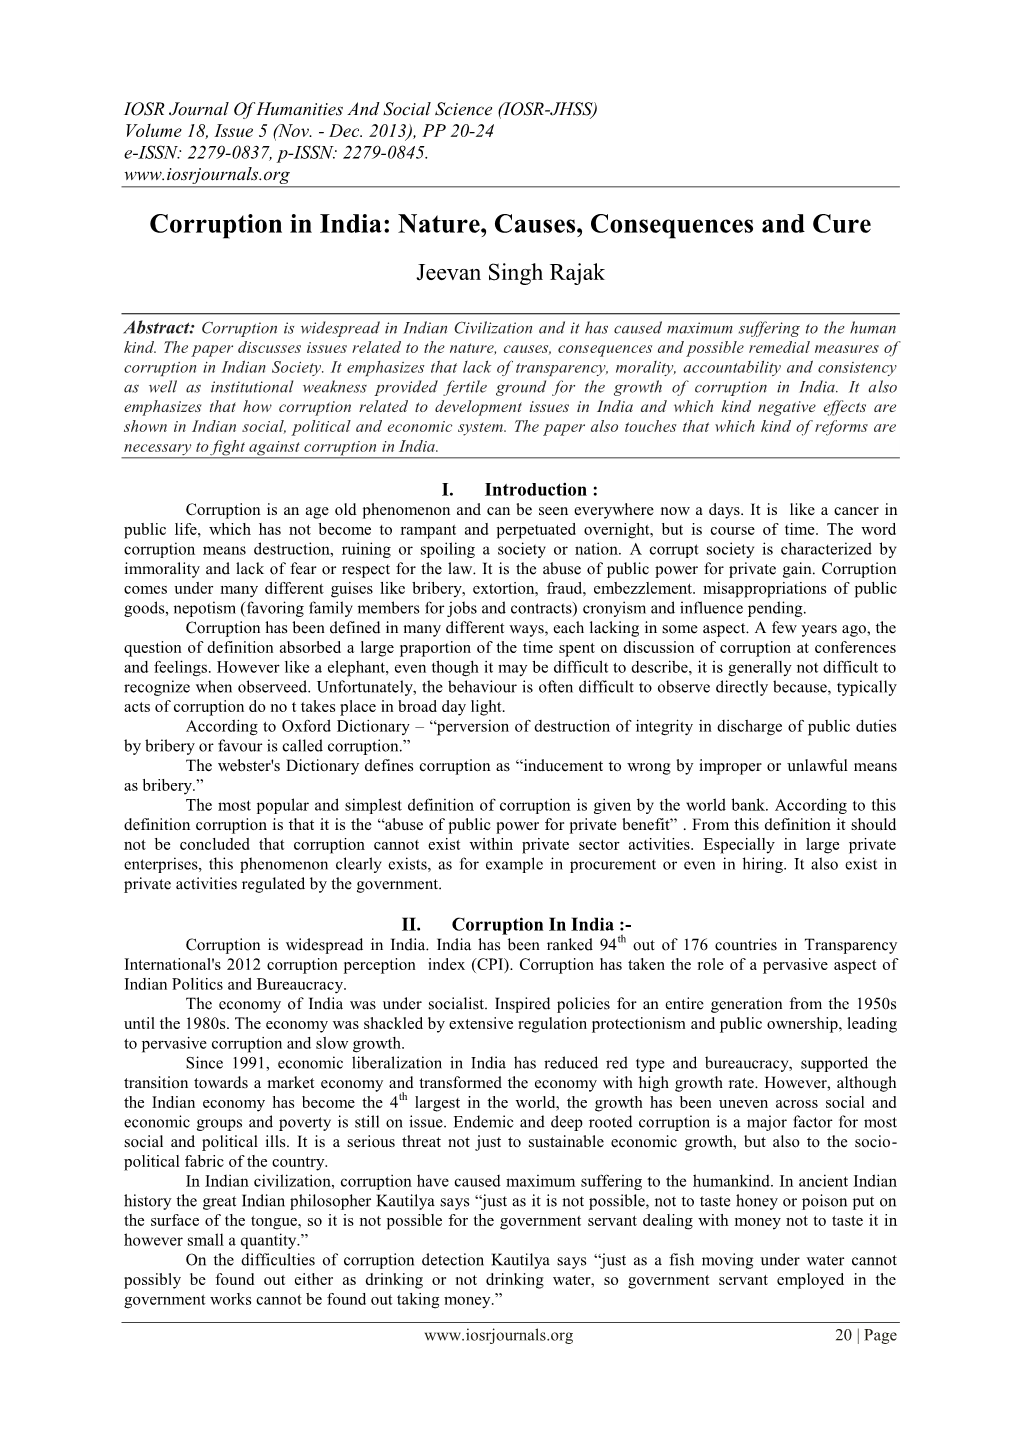 Corruption in India: Nature, Causes, Consequences and Cure